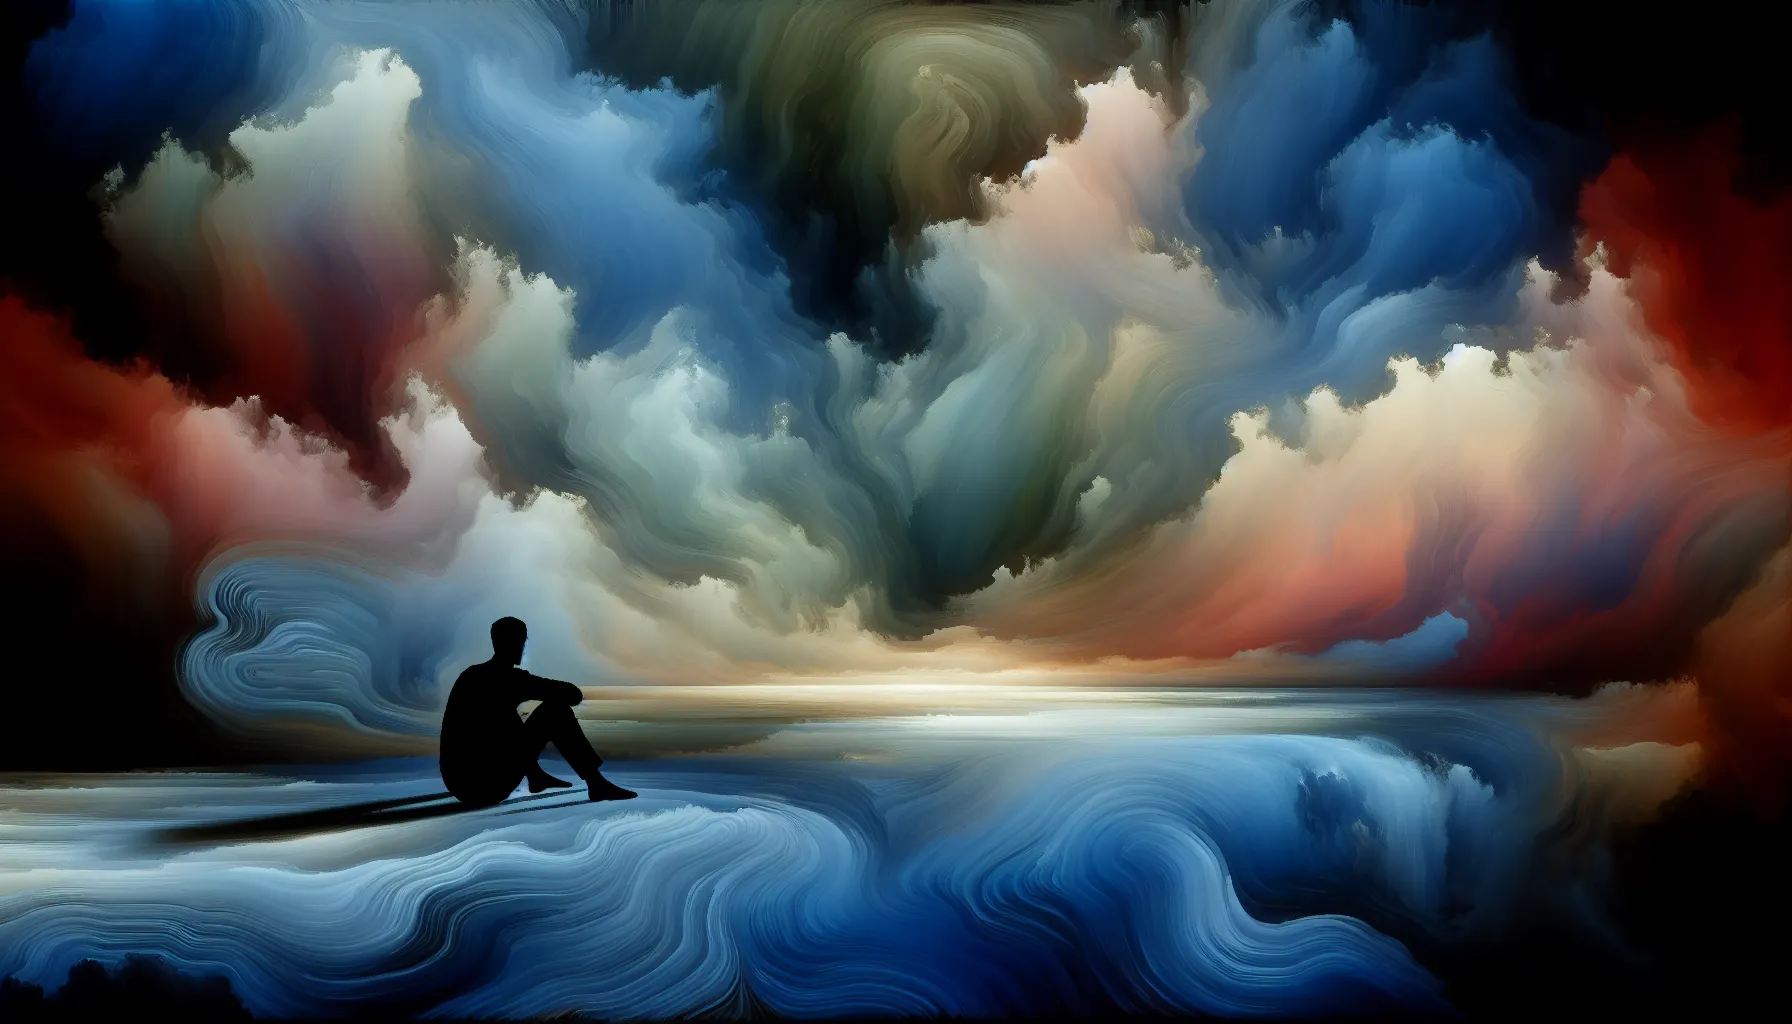 <strong>Serenity in Solitude:</strong> A visual metaphor for the quietude men seek amidst life's storms, reflecting the silent strength found within.